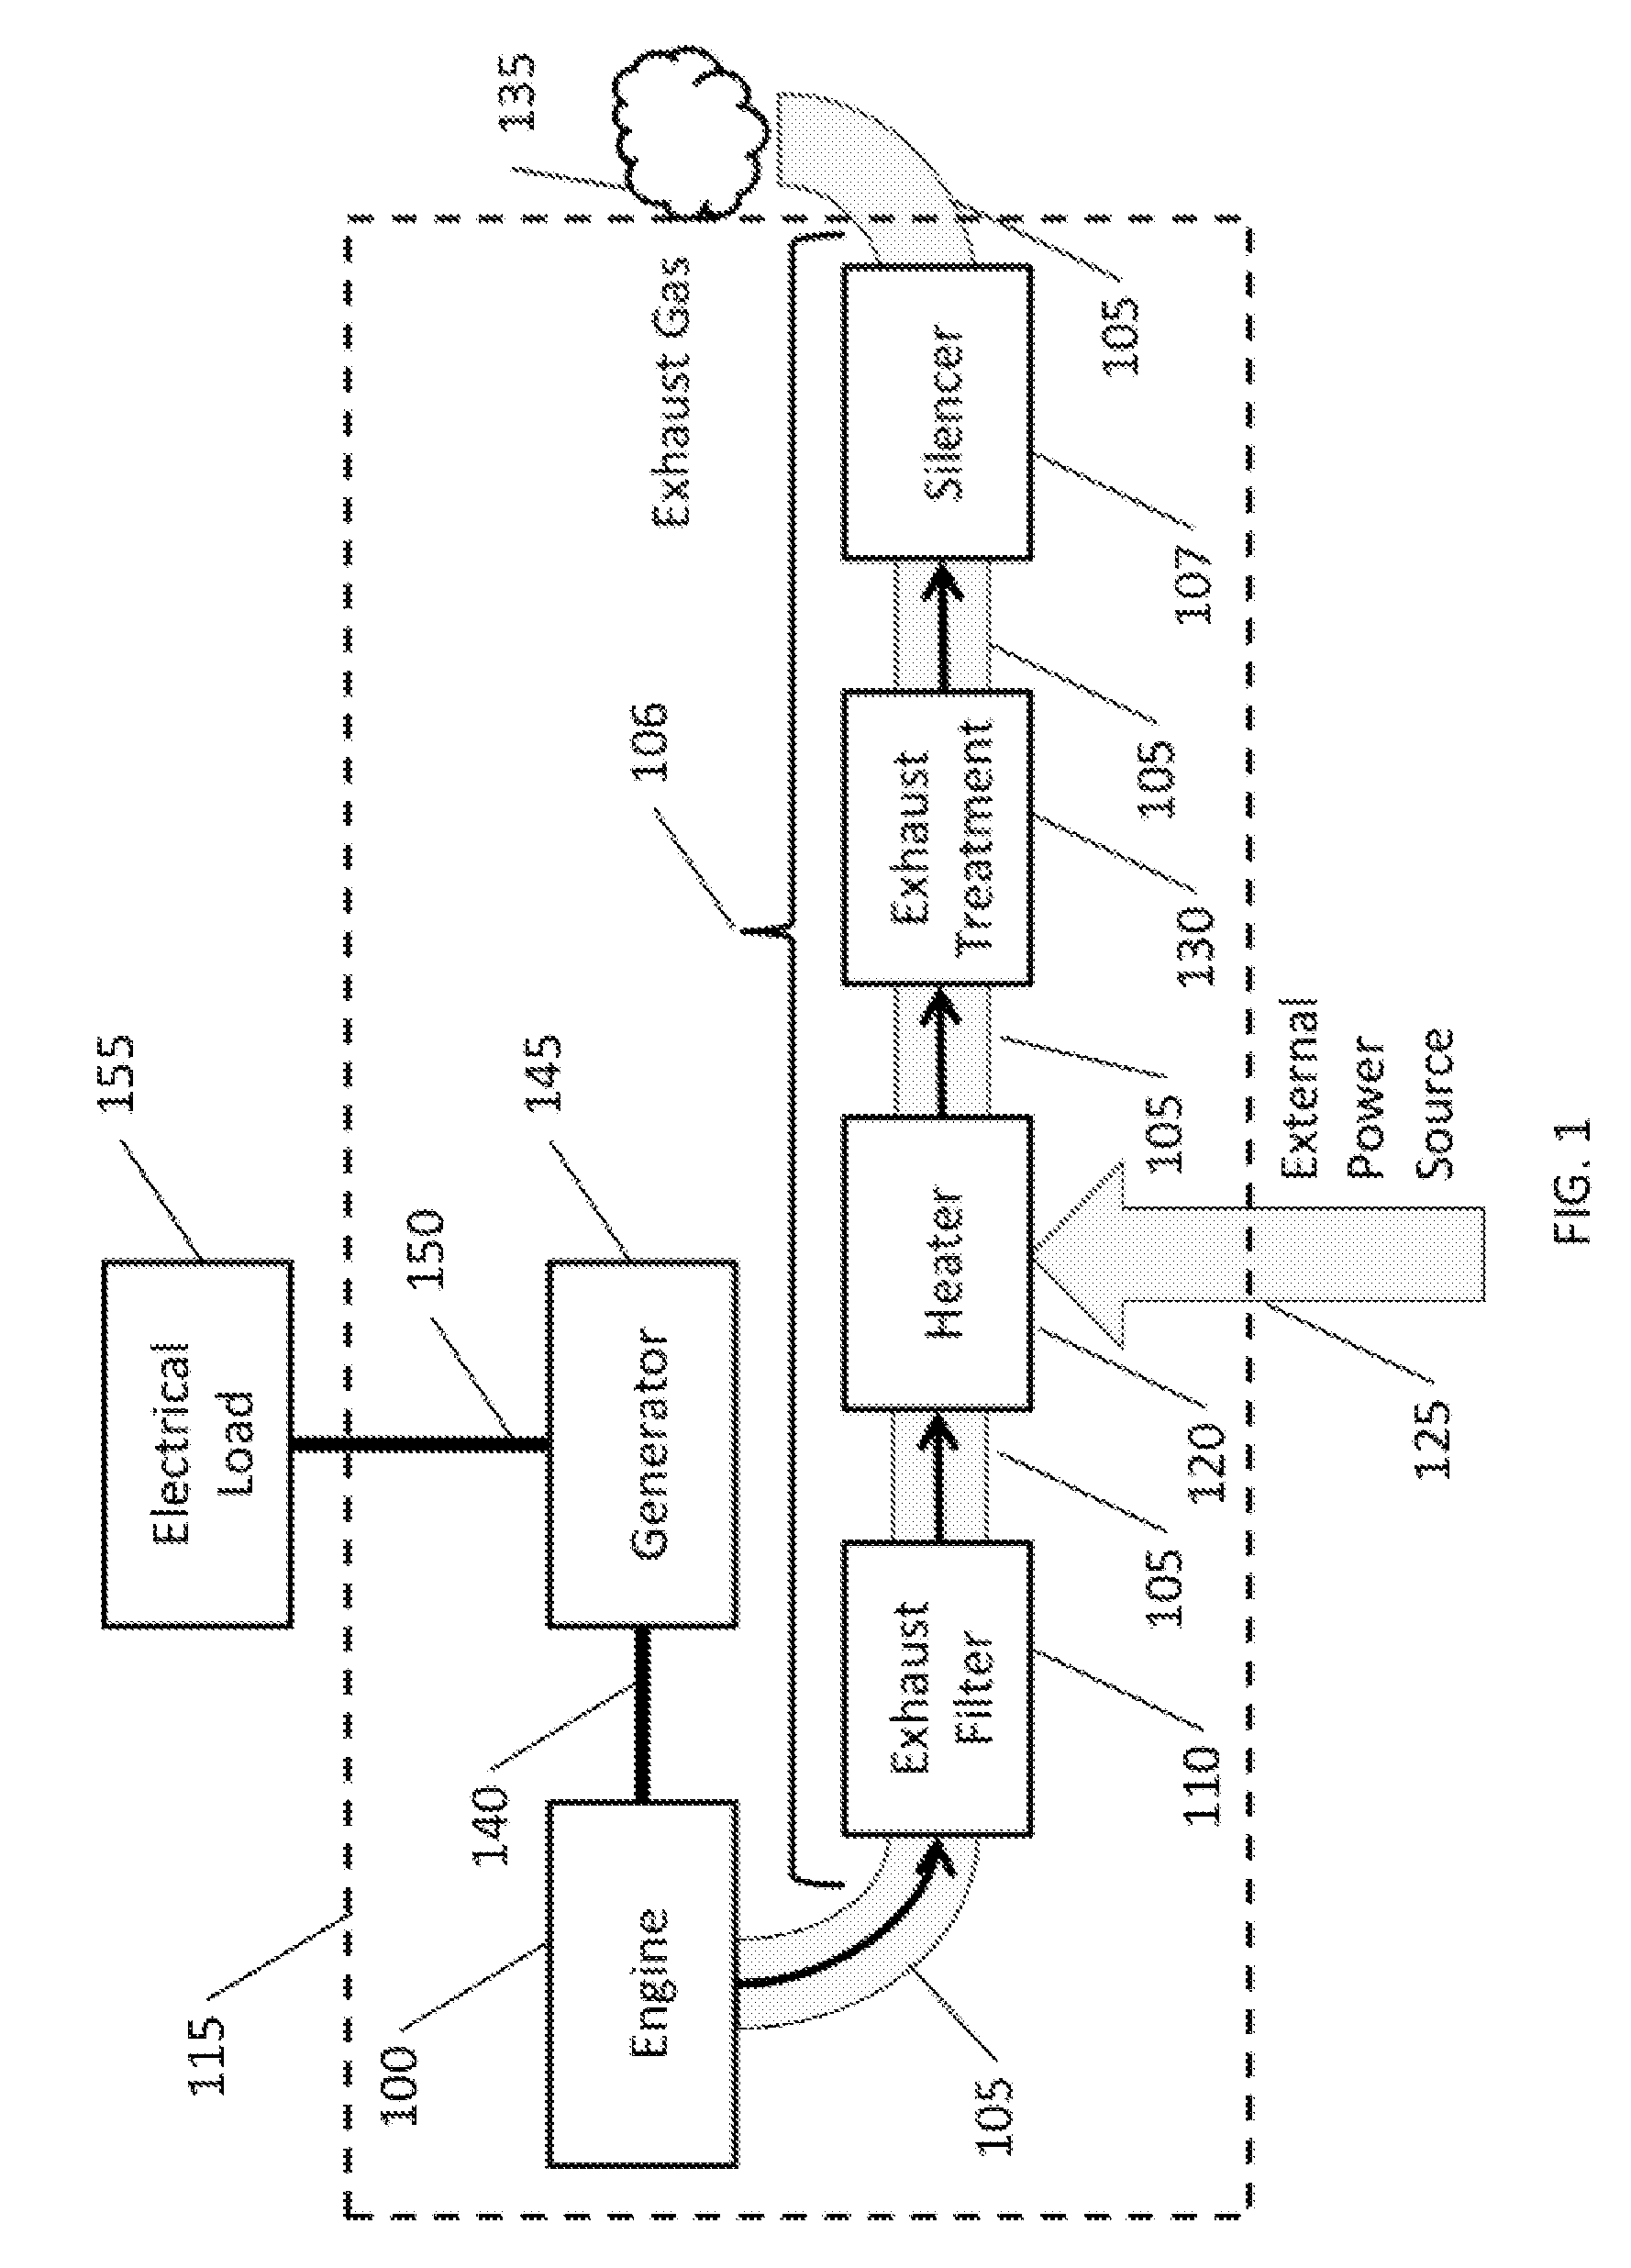 Integrated diesel particulate filter and electric load bank